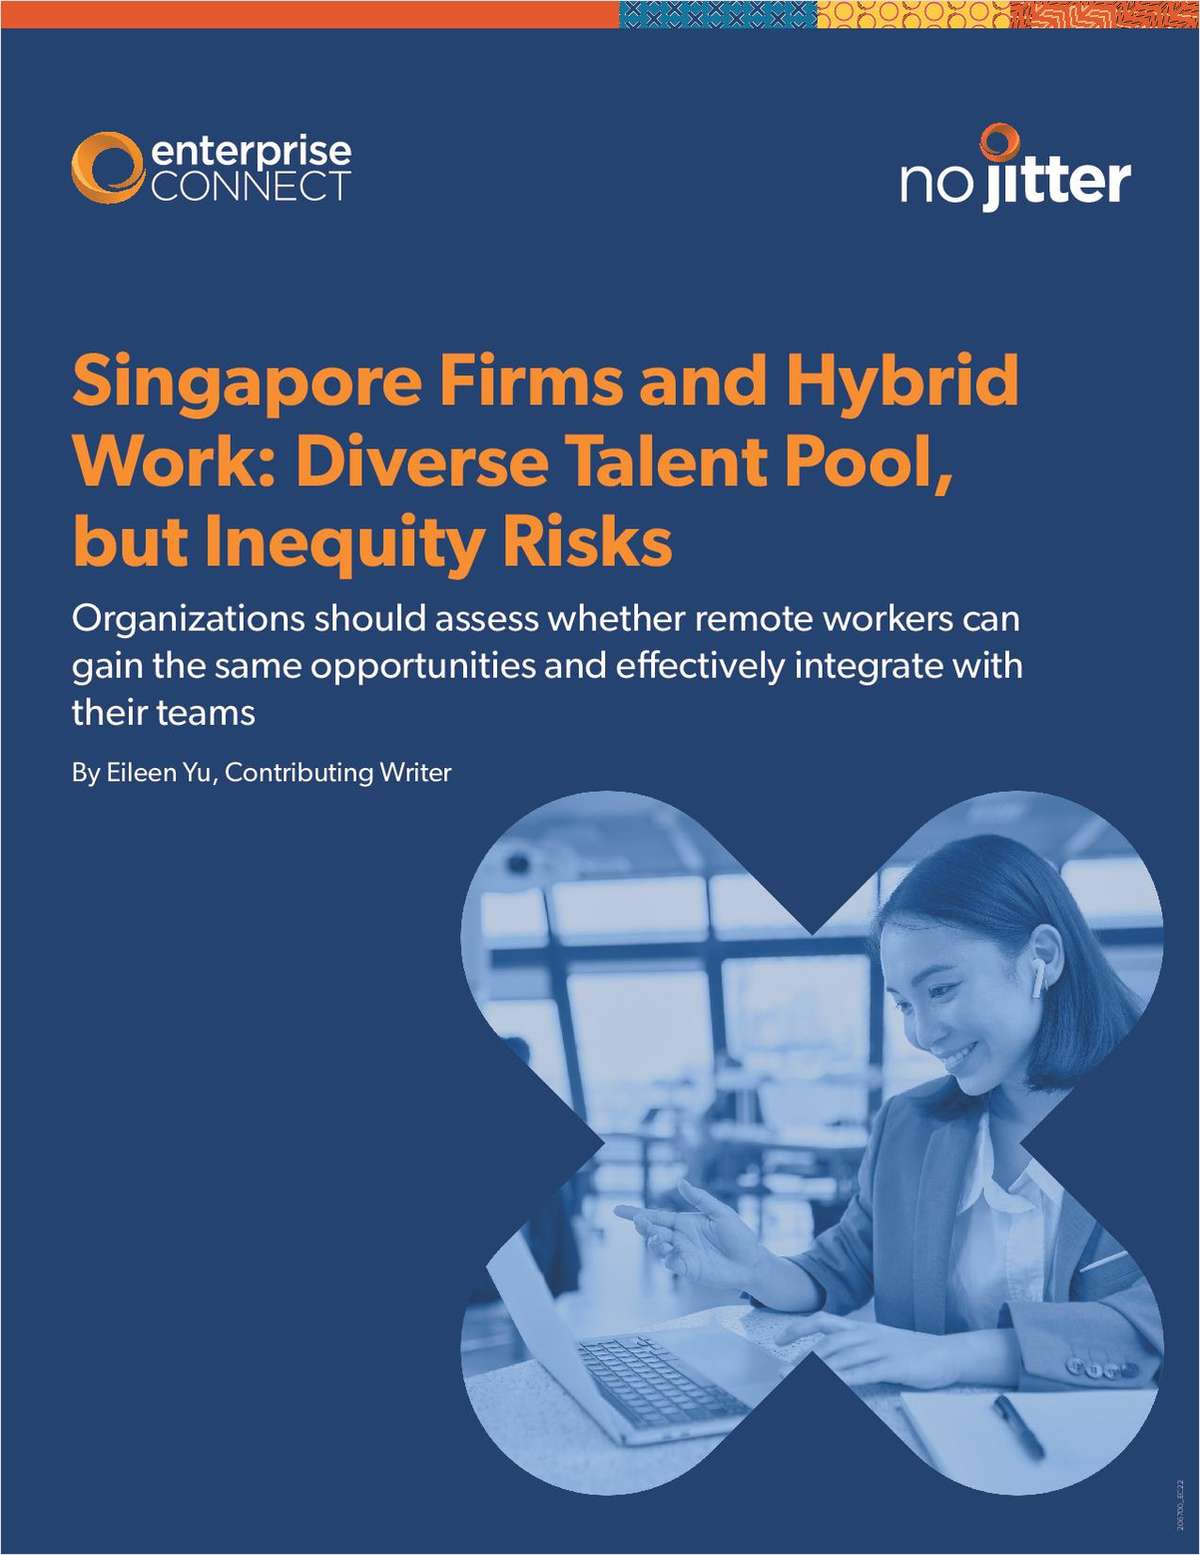 Singapore Firms and Hybrid Work Report 